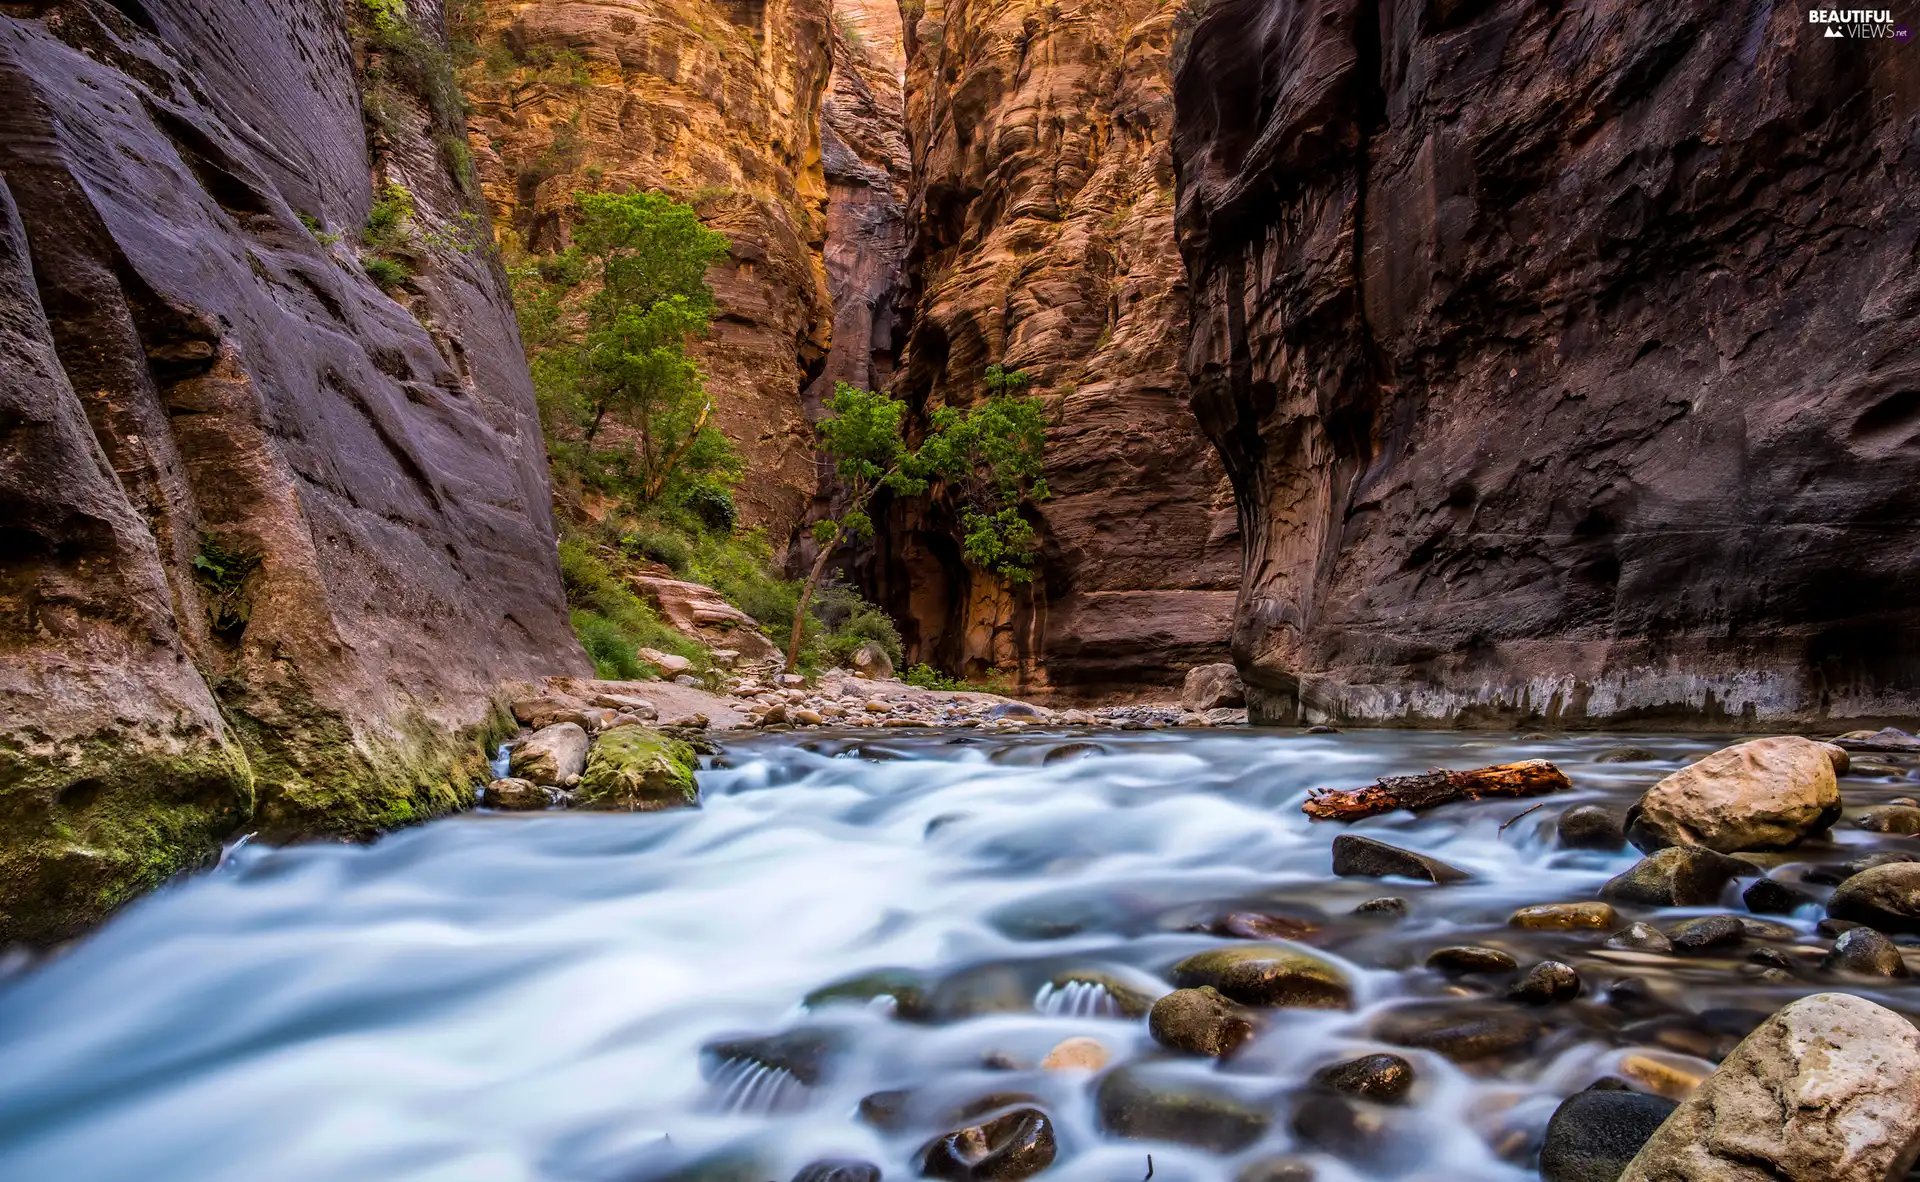 Zion National Park, The United States, rocks, Virgin River, Zion Narrows Canyon, Utah State